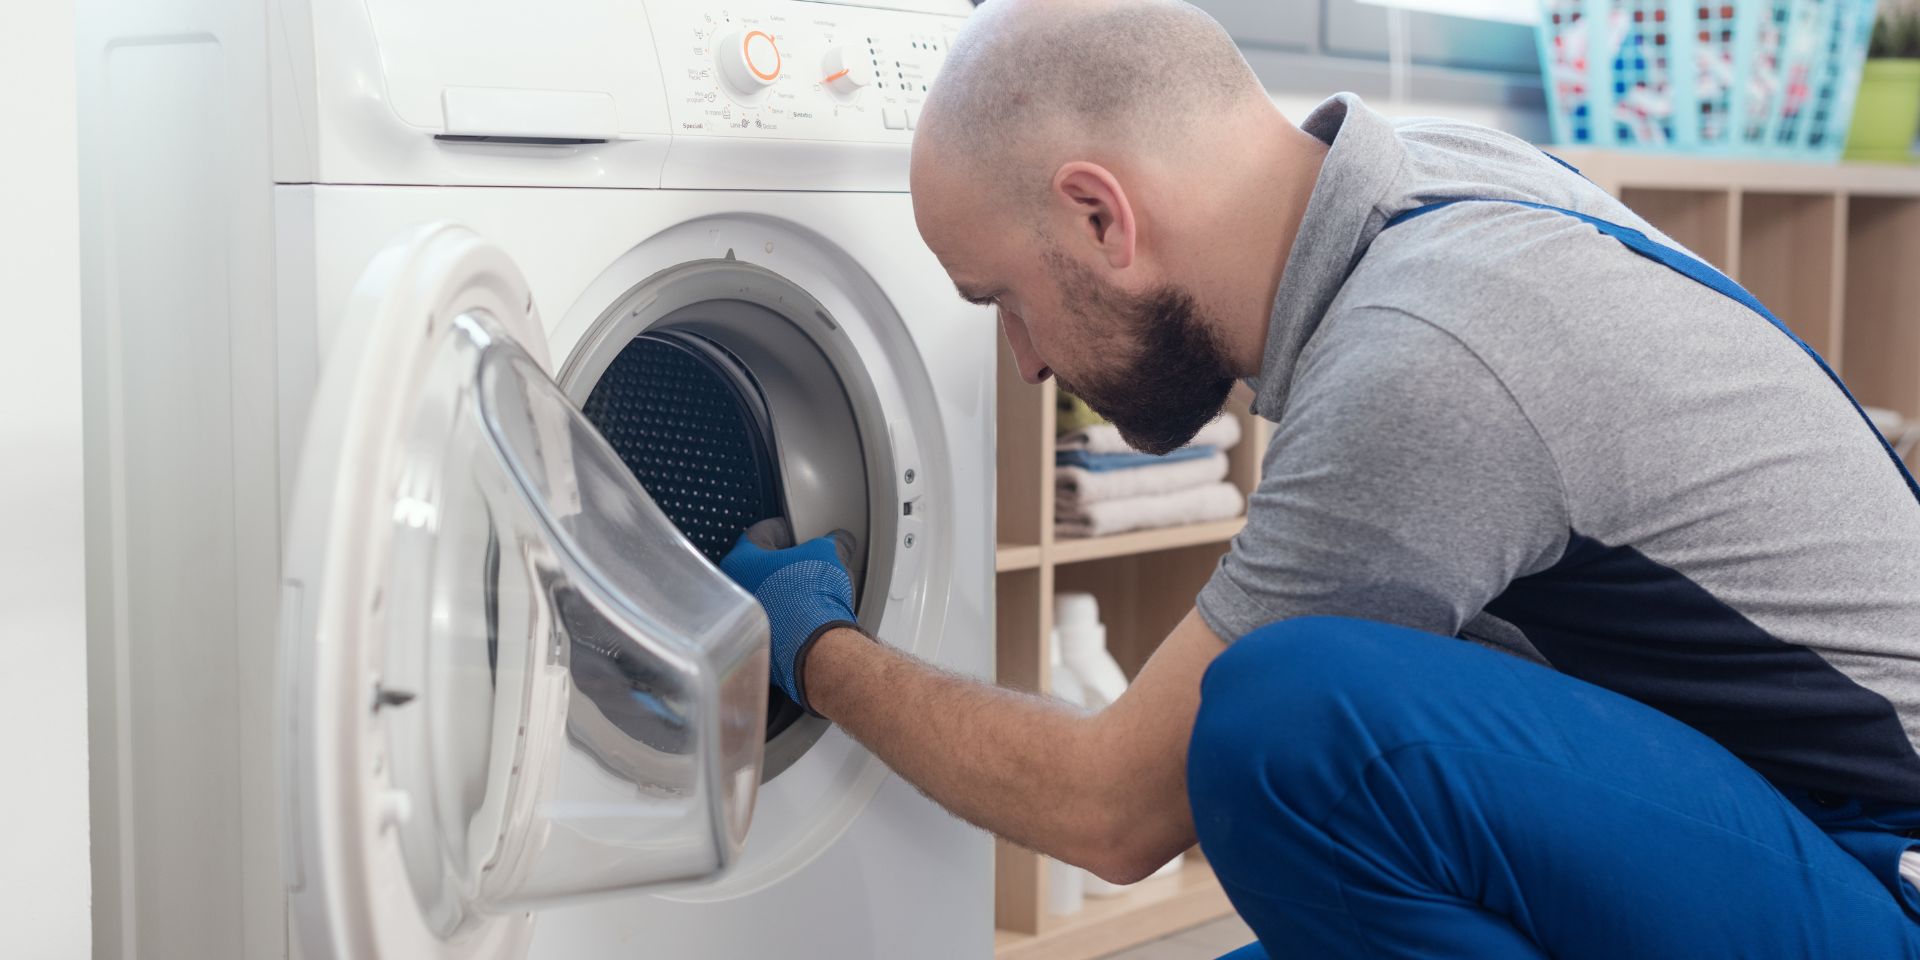 ManageLife's 80-point inspection for washer and dryer